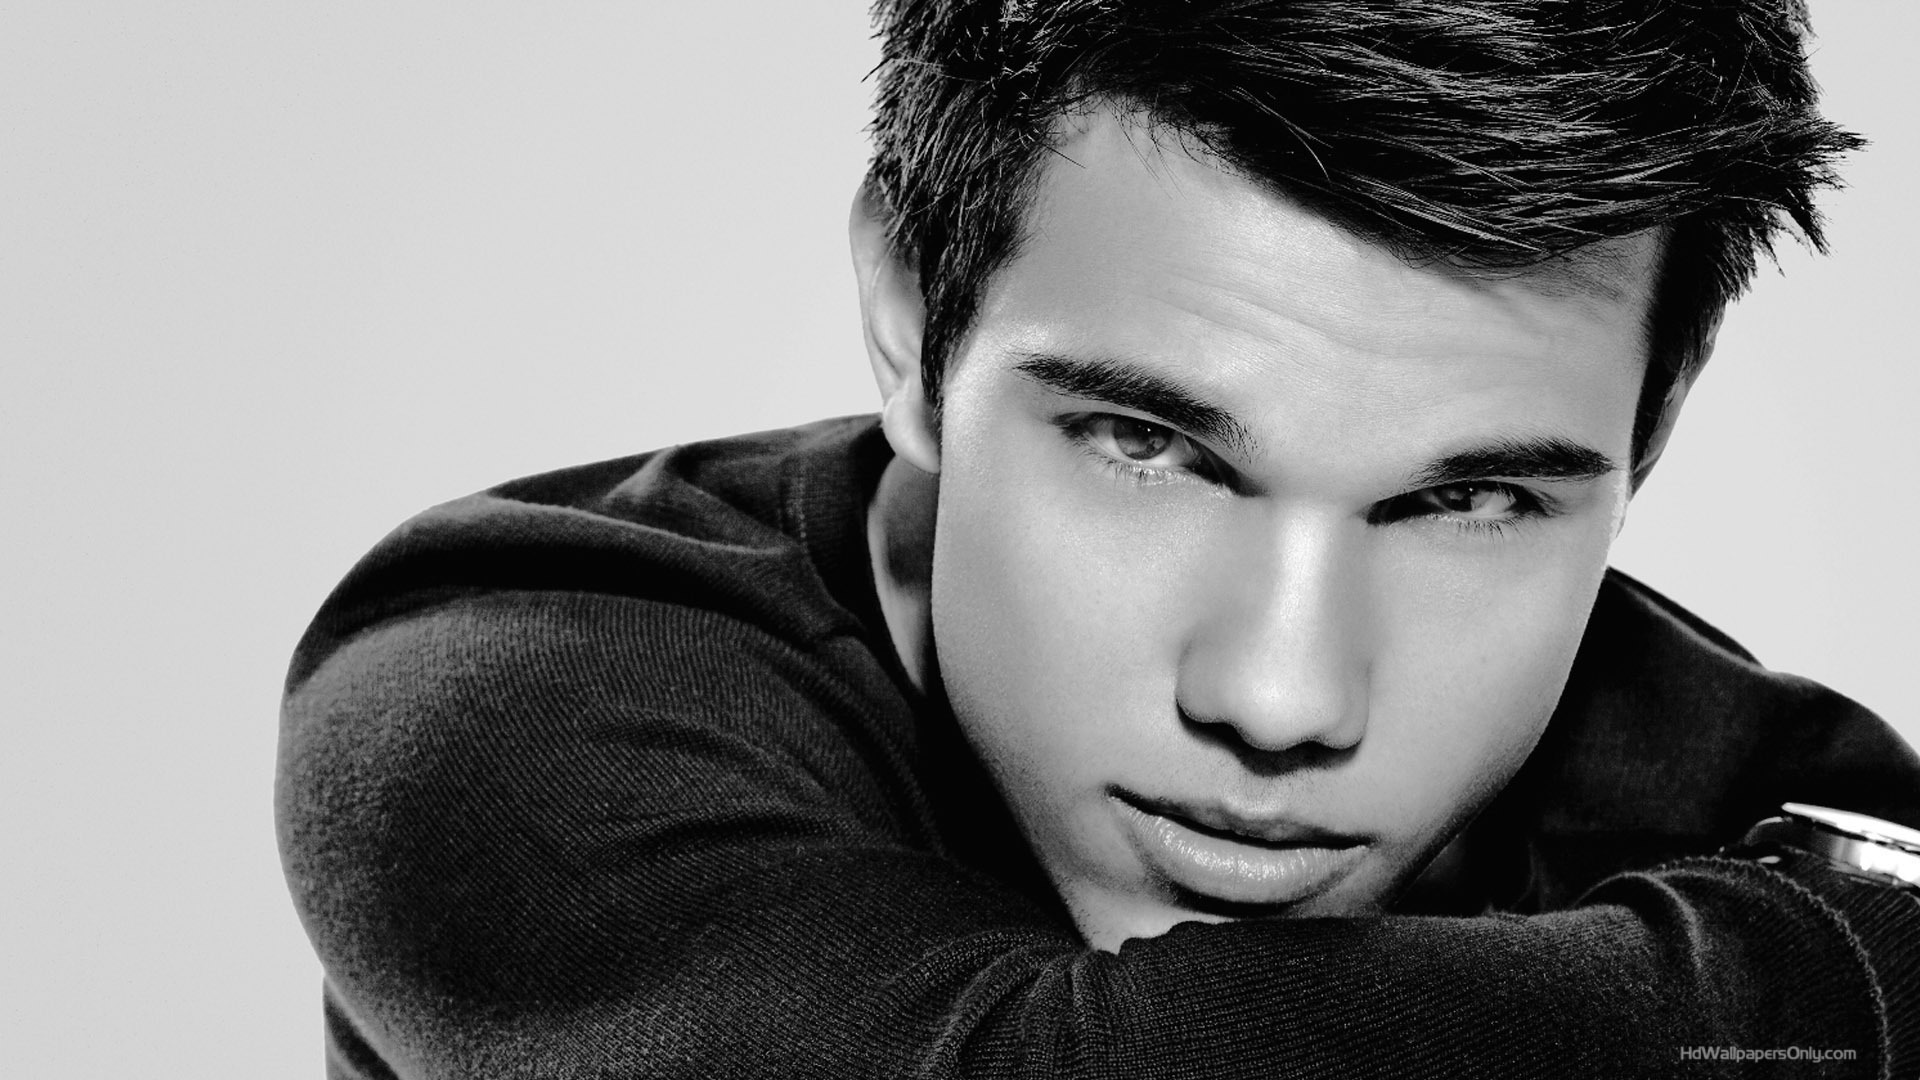 Taylor Lautner Wallpaper Image Photos Pictures Background